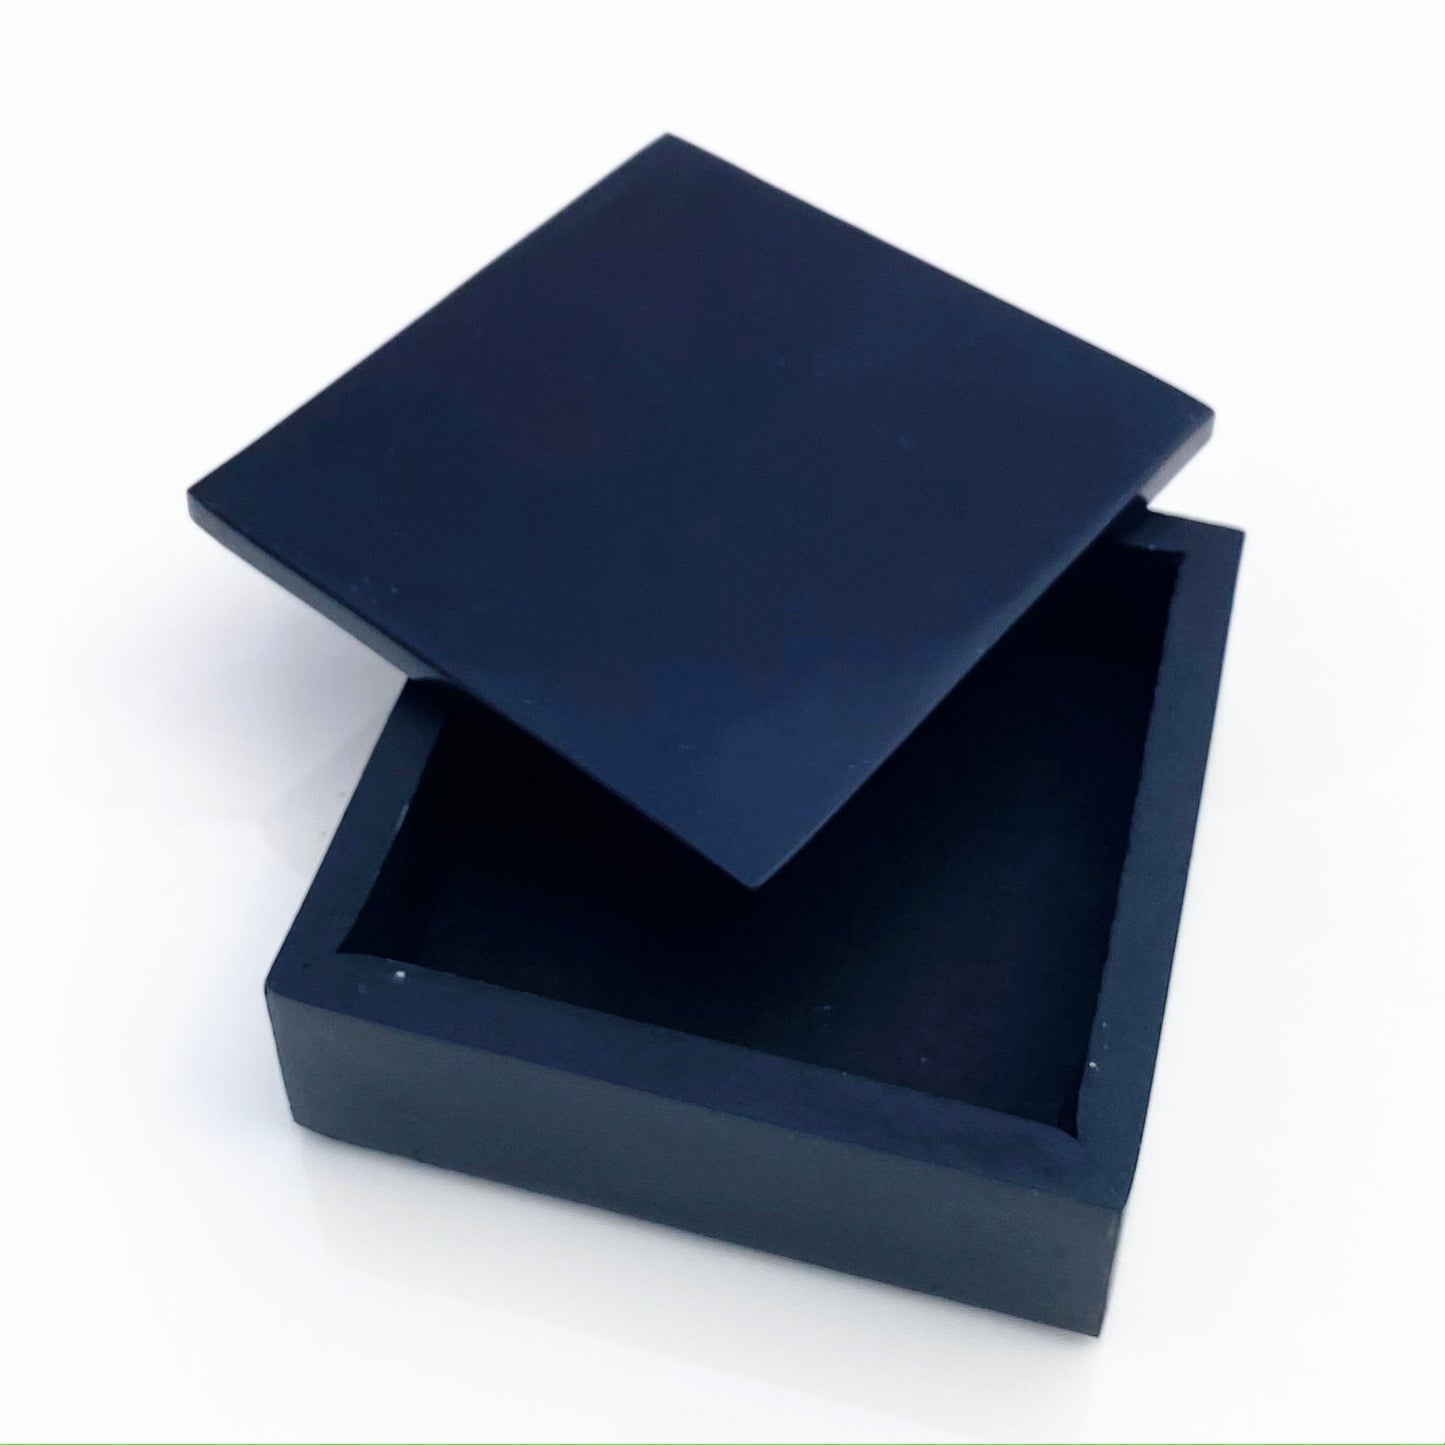 Hand made black box made in Greenland from Black Marble. Te Plus Te Archive.